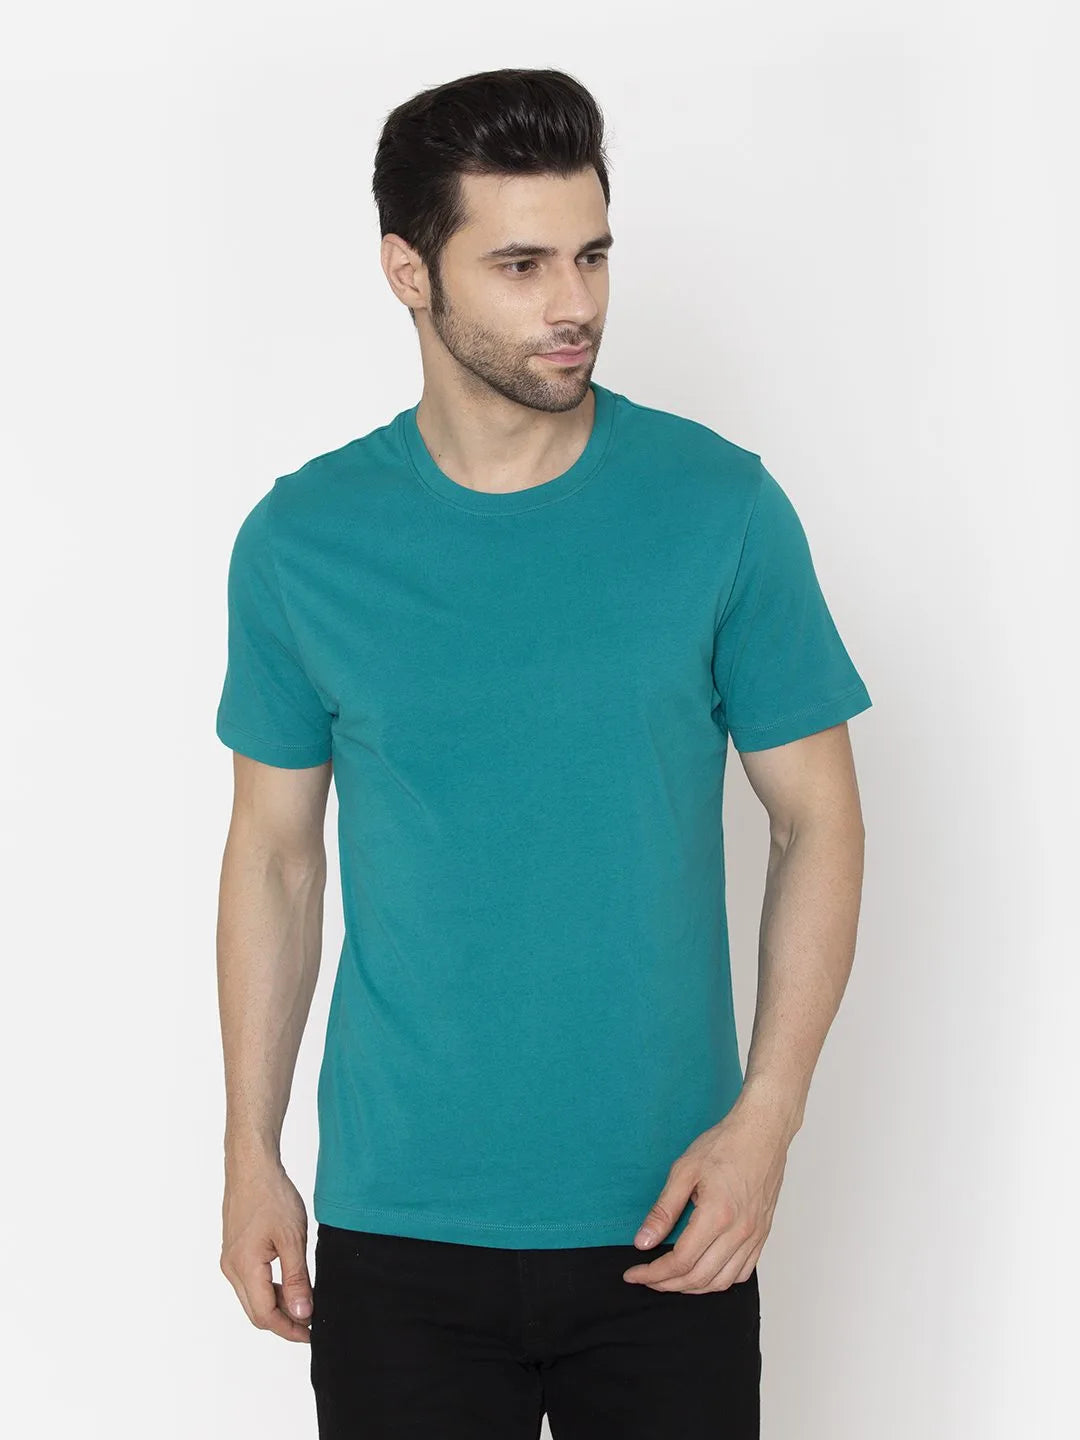 Flawless Men's Aquarius Cotton T-shirt | FRIDAY Being Flawless